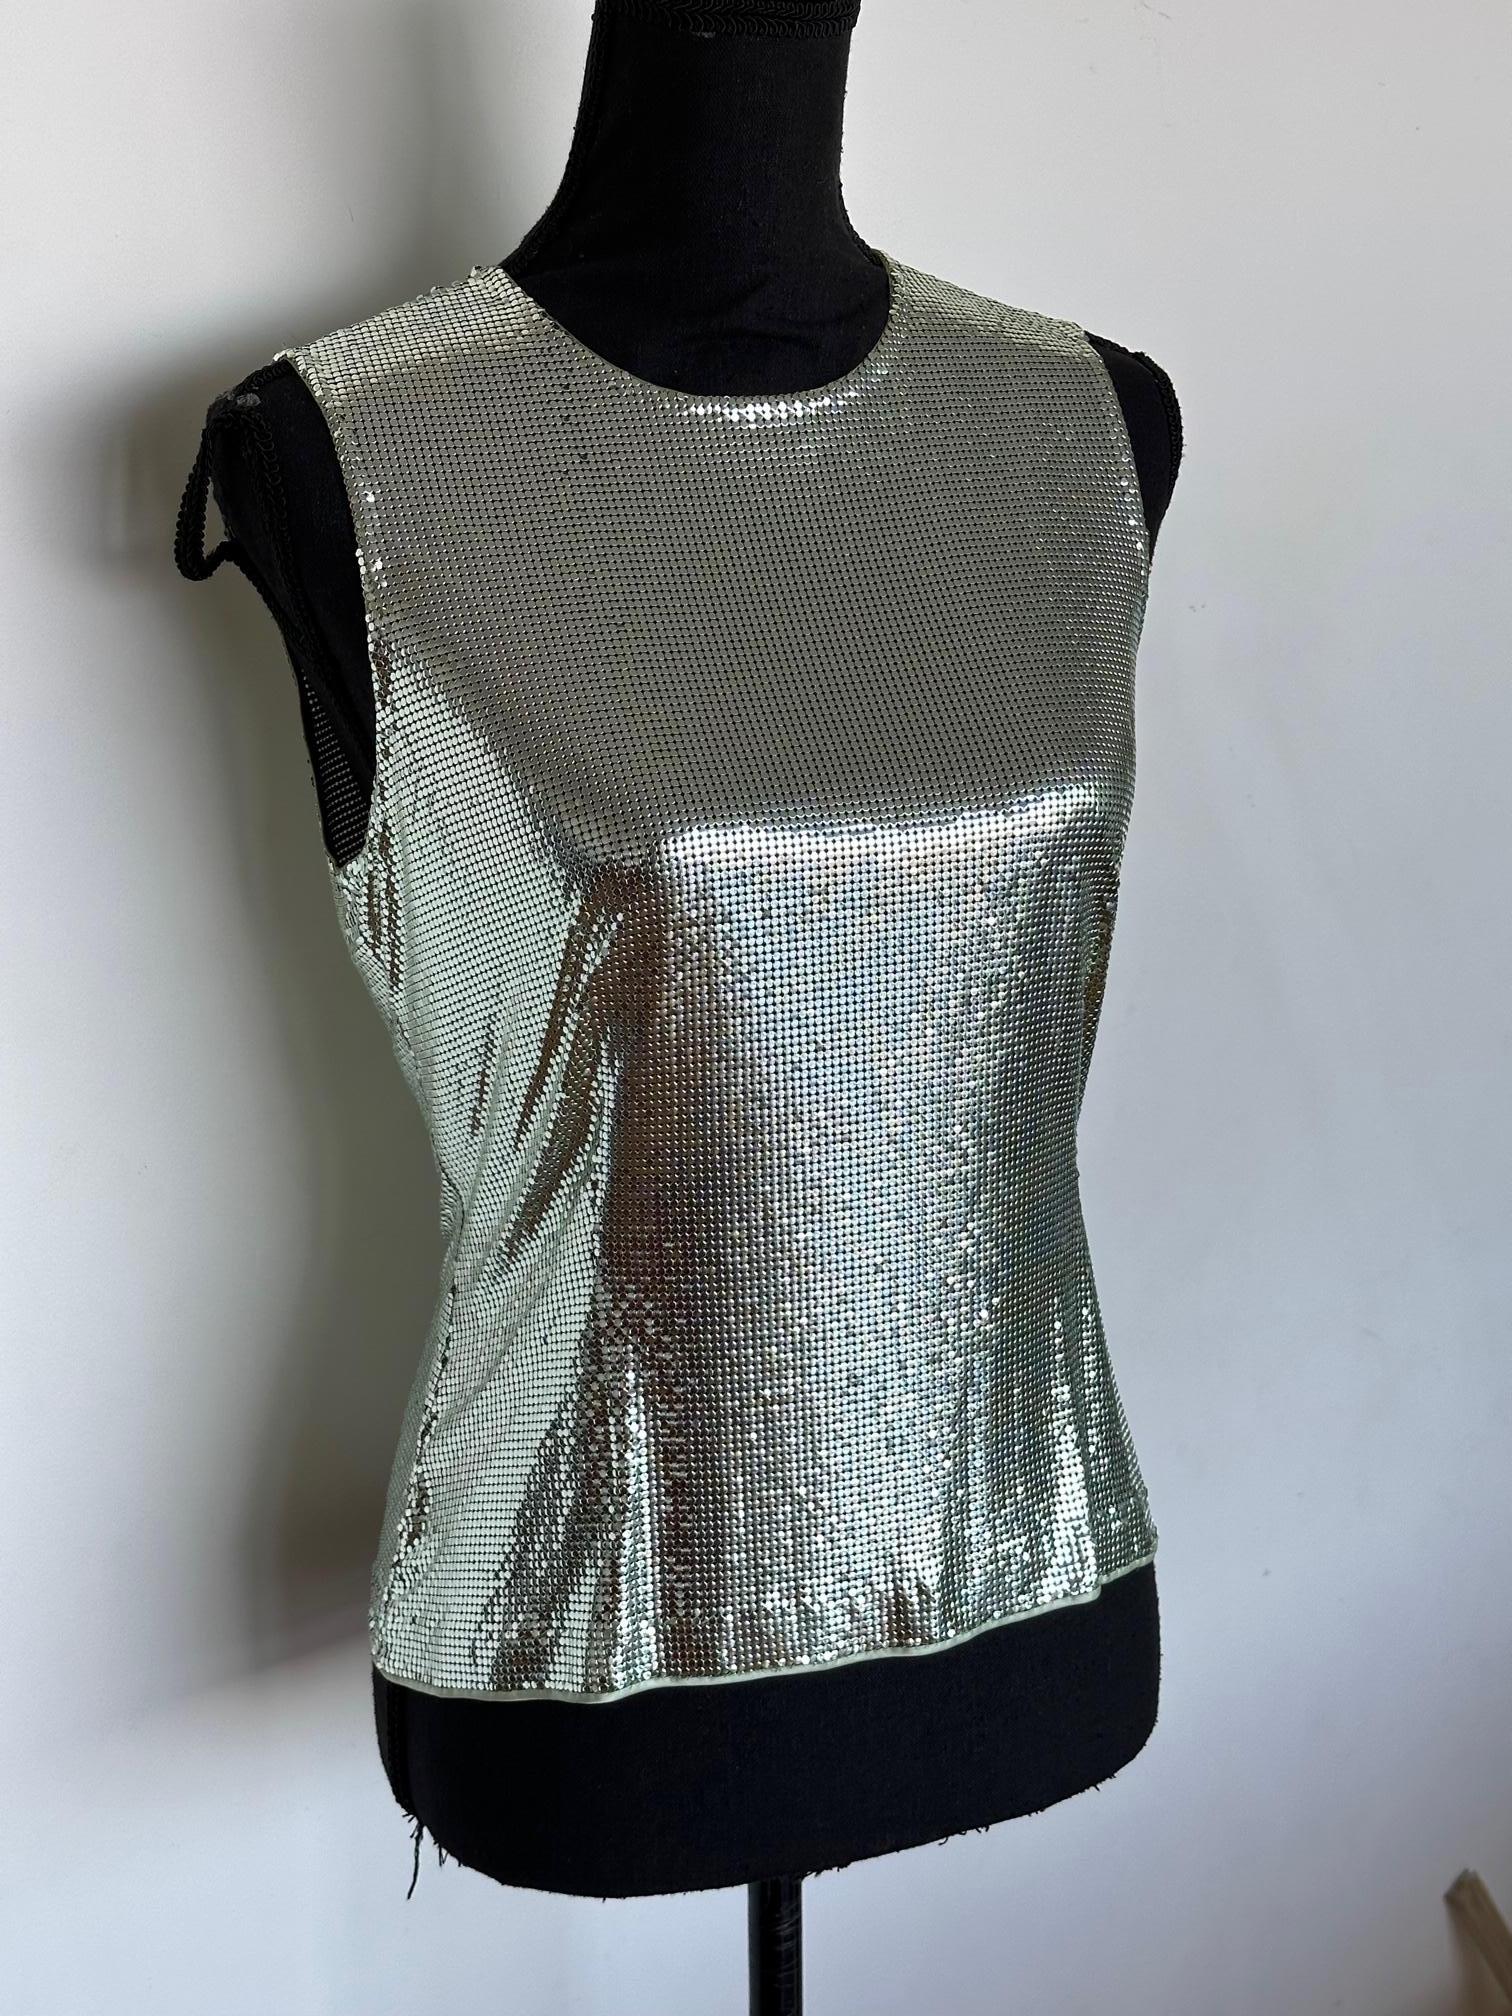 Gianni Versace Couture Metallic Mesh Top For Sale 2